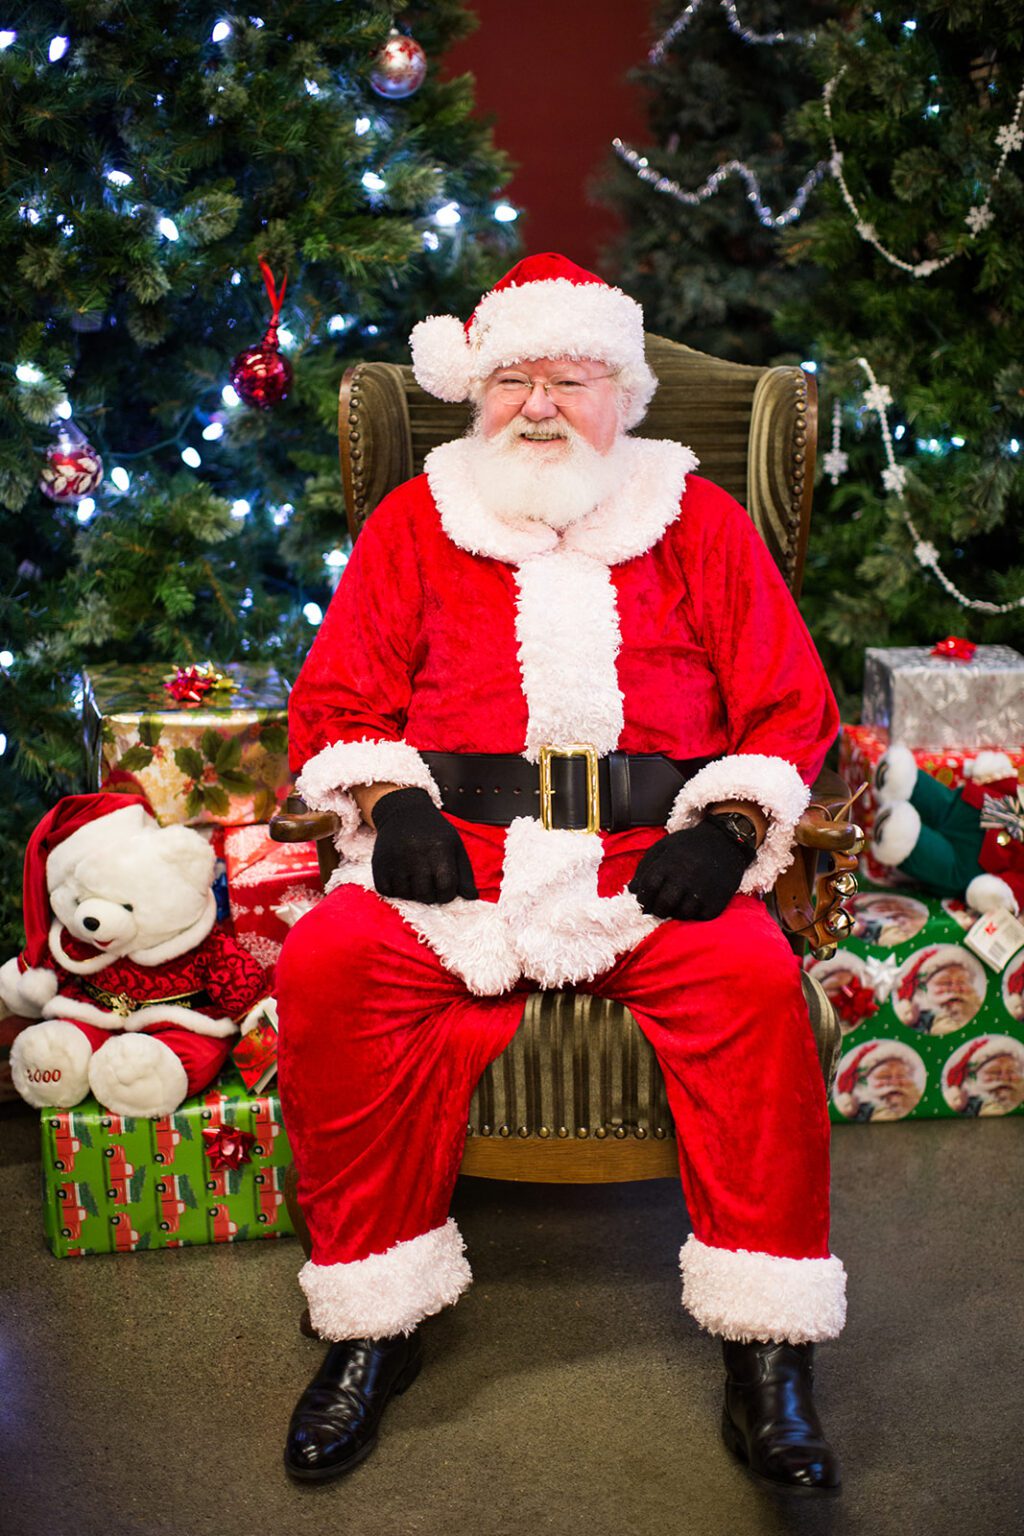 Get free photos with Santa Dec. 10–11 and 17–18 at Bellewood Farms. The big guy in red will also be in attendance at a Holiday Fair taking place Dec. 10 at the Port of Anacortes Transit Shed